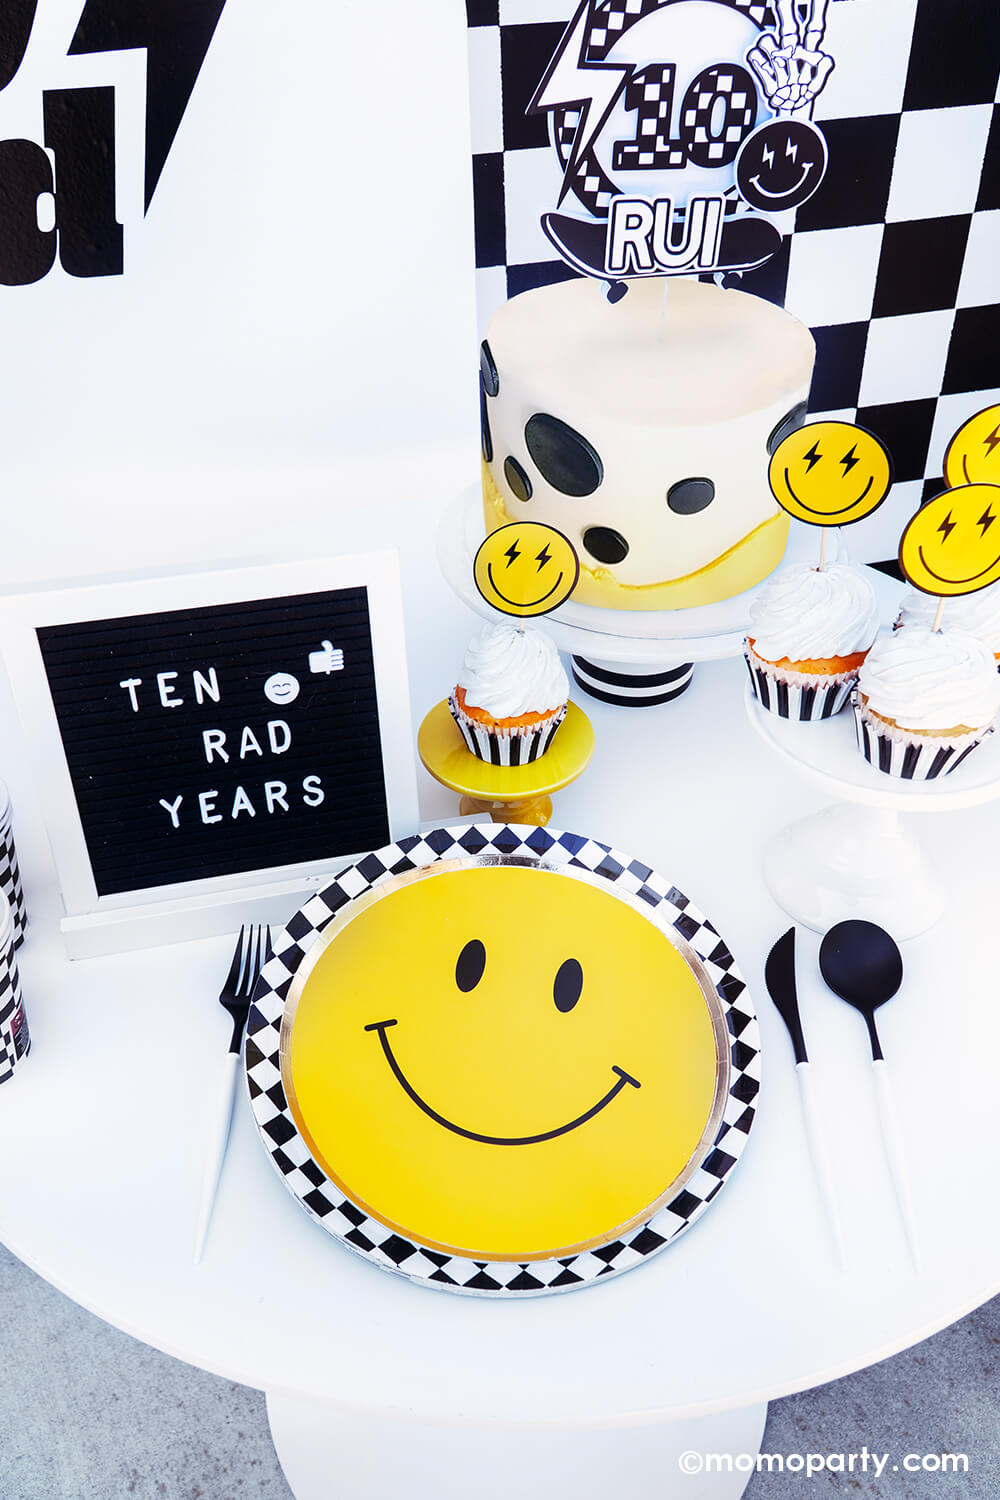 Boy's "Ten Rad Years" 10th birthday party tablescape by Momo Party. Featuring the classic black and white checkered patterned plates, cups, napkins and smiley face plates, this rad party table decoration is perfect for your cool dude's very first double digits party! With a mix of cool dude aesthetics, smiley-face accents, and checkered patterns in black and white, we've got the perfect recipe for a memorable boy's birthday bash. Don't miss out on making this party as special as your rad boy.